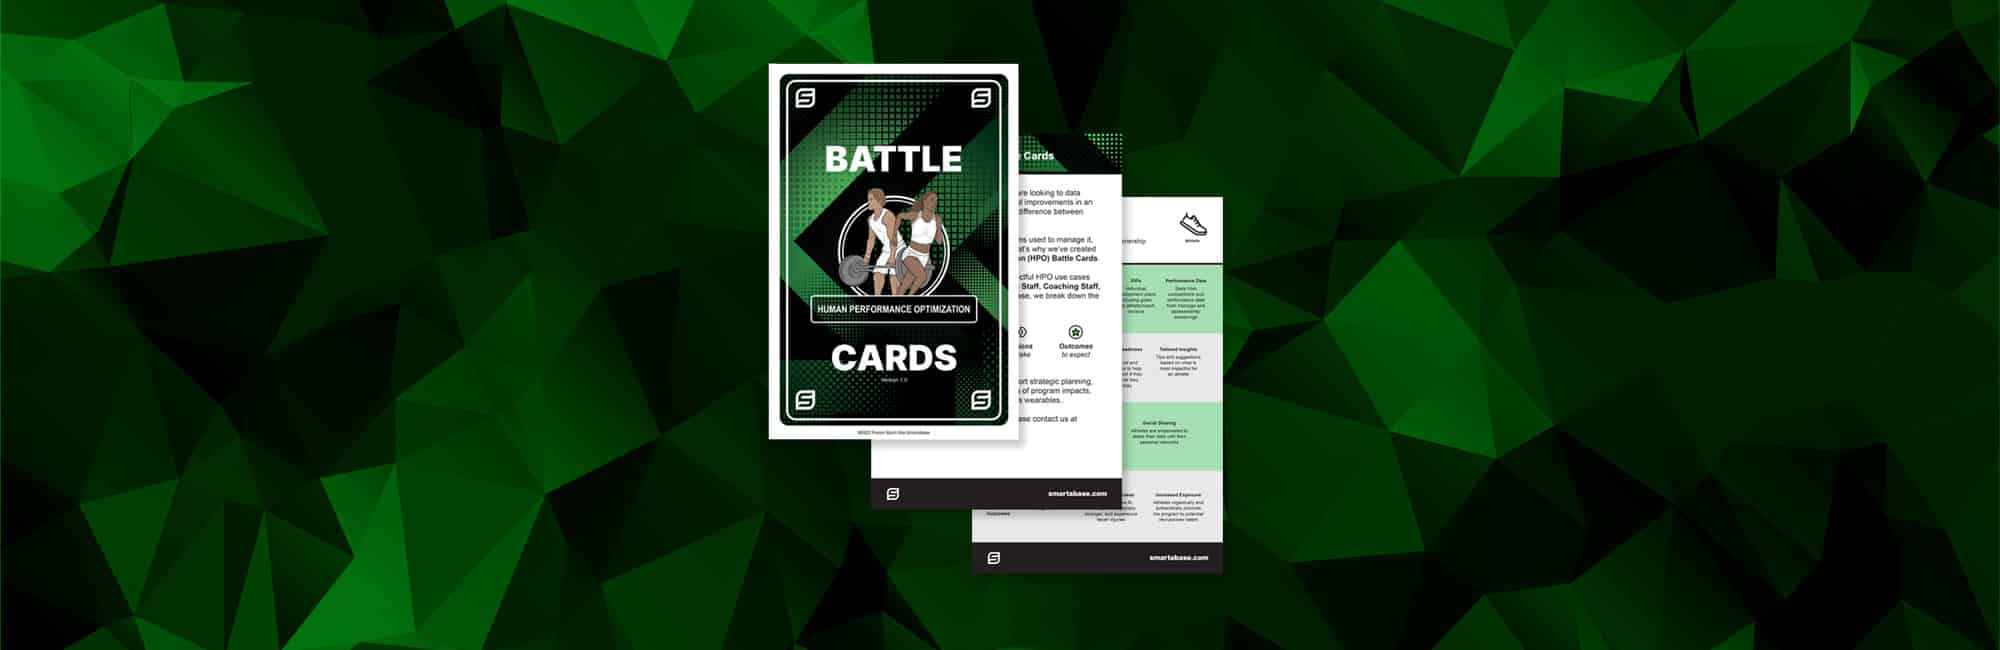 HPO Battle Cards for Sports